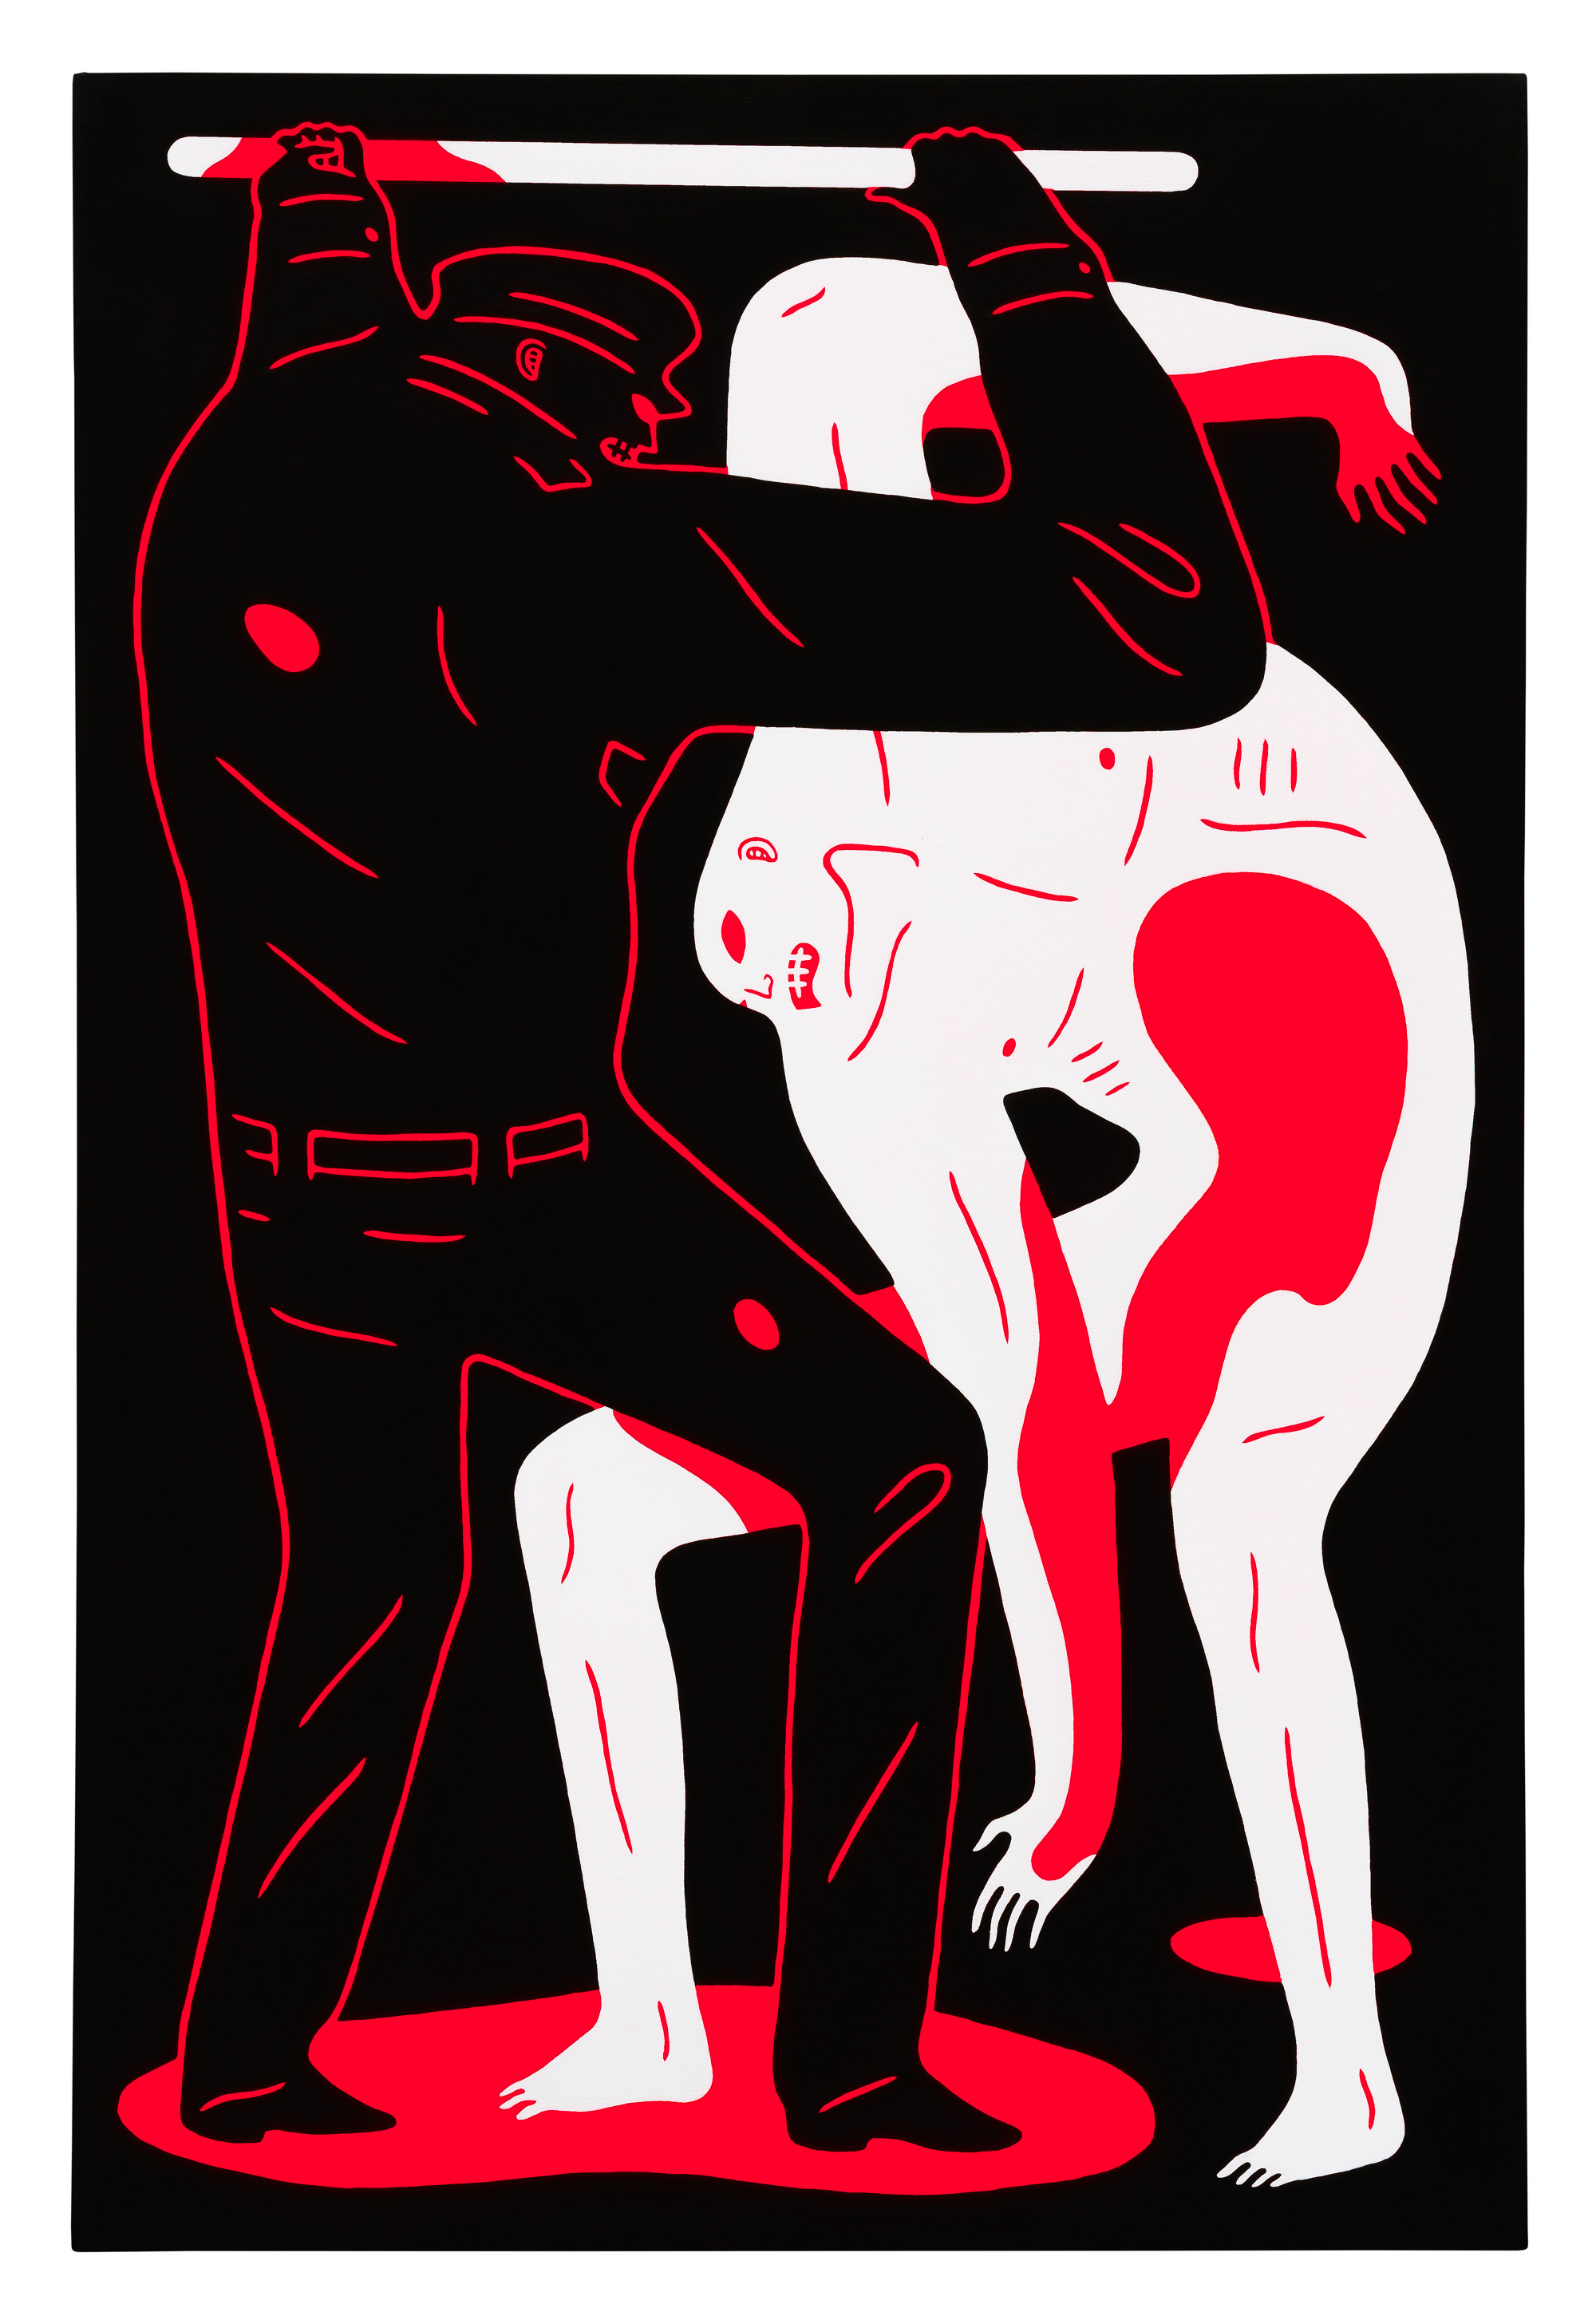 Submission2-cleon-peterson-amadeus